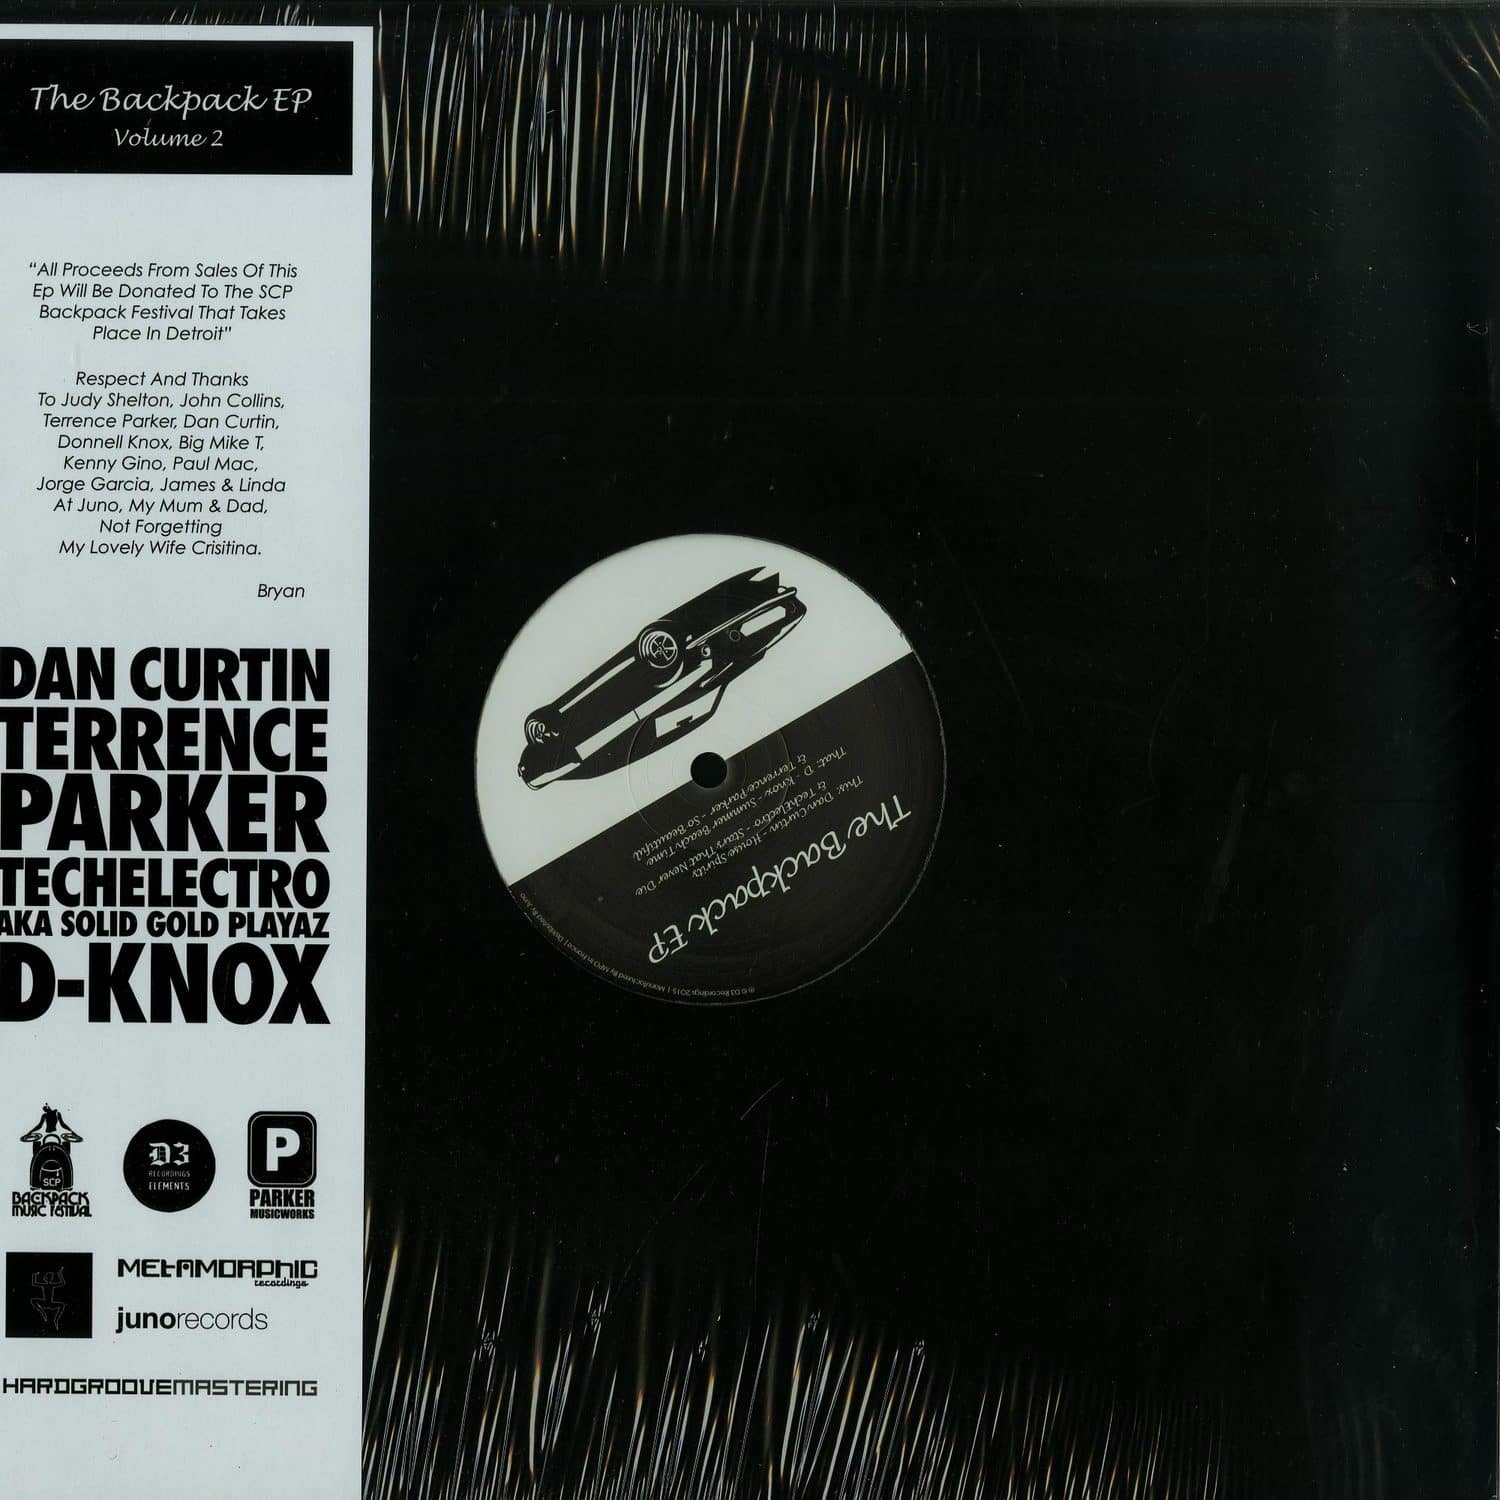 Dan Curtin / Techelectro / D Knox / Terrence Parker - THE BACKPACK EP VOL 2